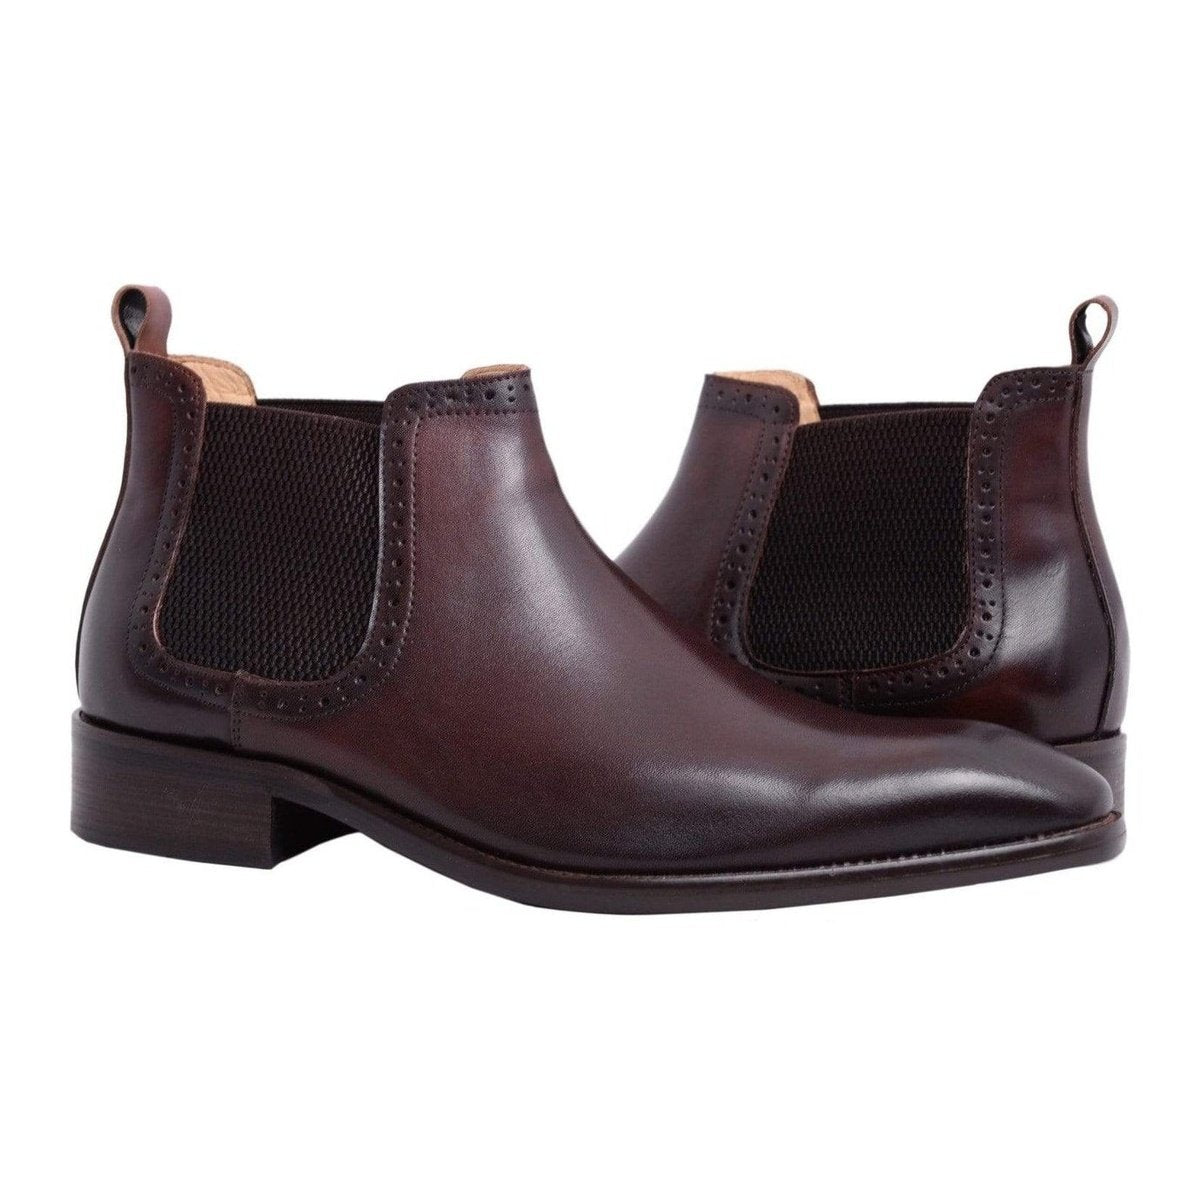 Carrucci 8.5 Carrucci Mens Chestnut Brown Slip-on Chelsea Leather Dress Boots